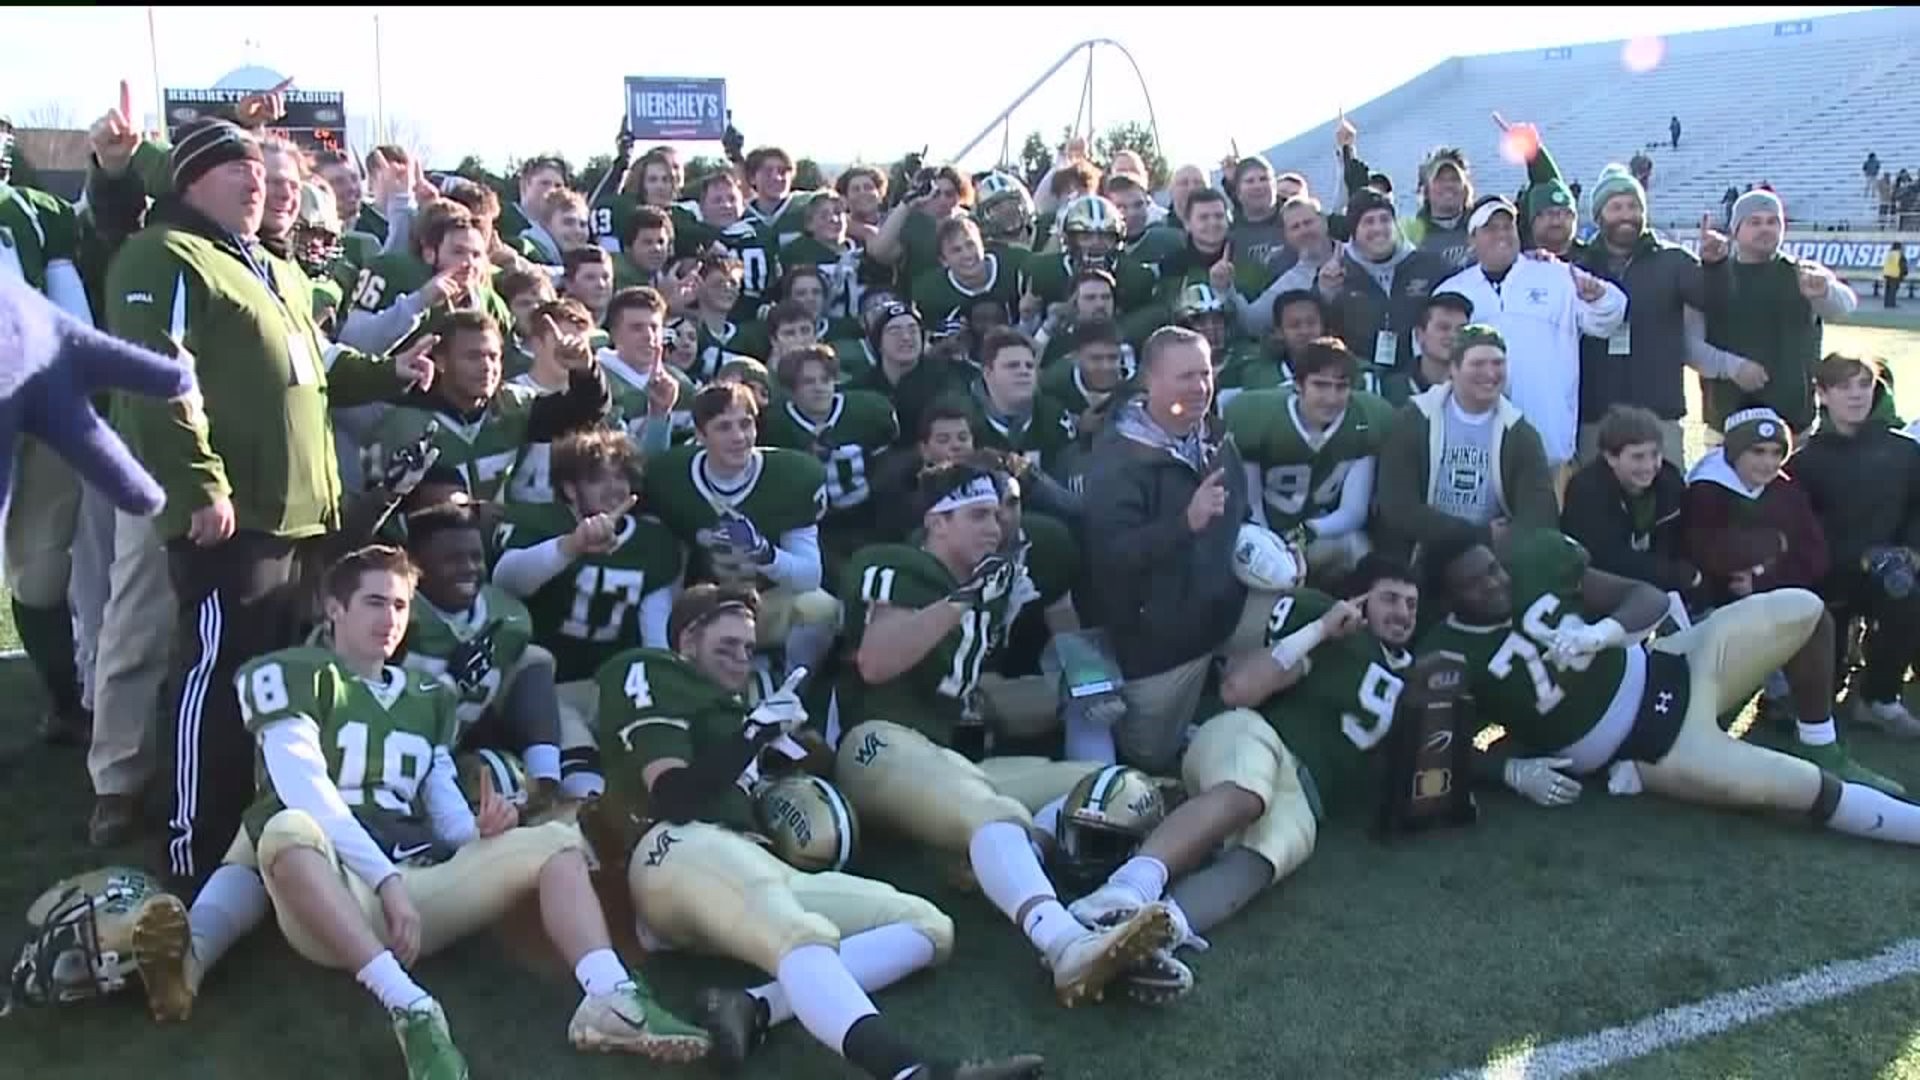 Wyoming Area Rallies to Win State Championship